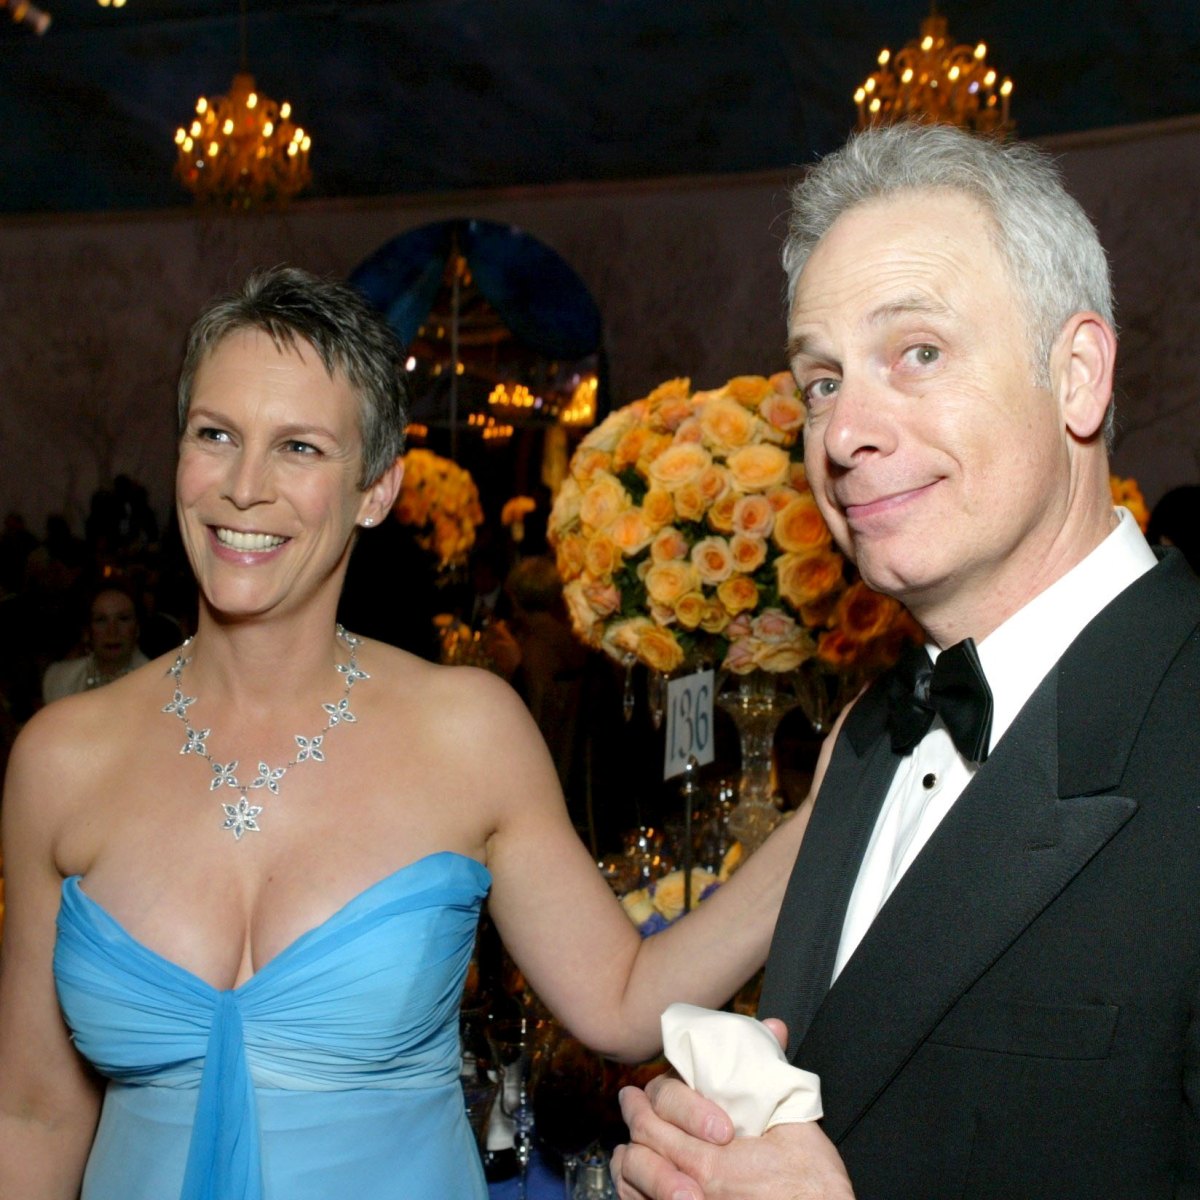 Who Is Jamie Lee Curtis' Husband? Meet Spouse Christopher Guest